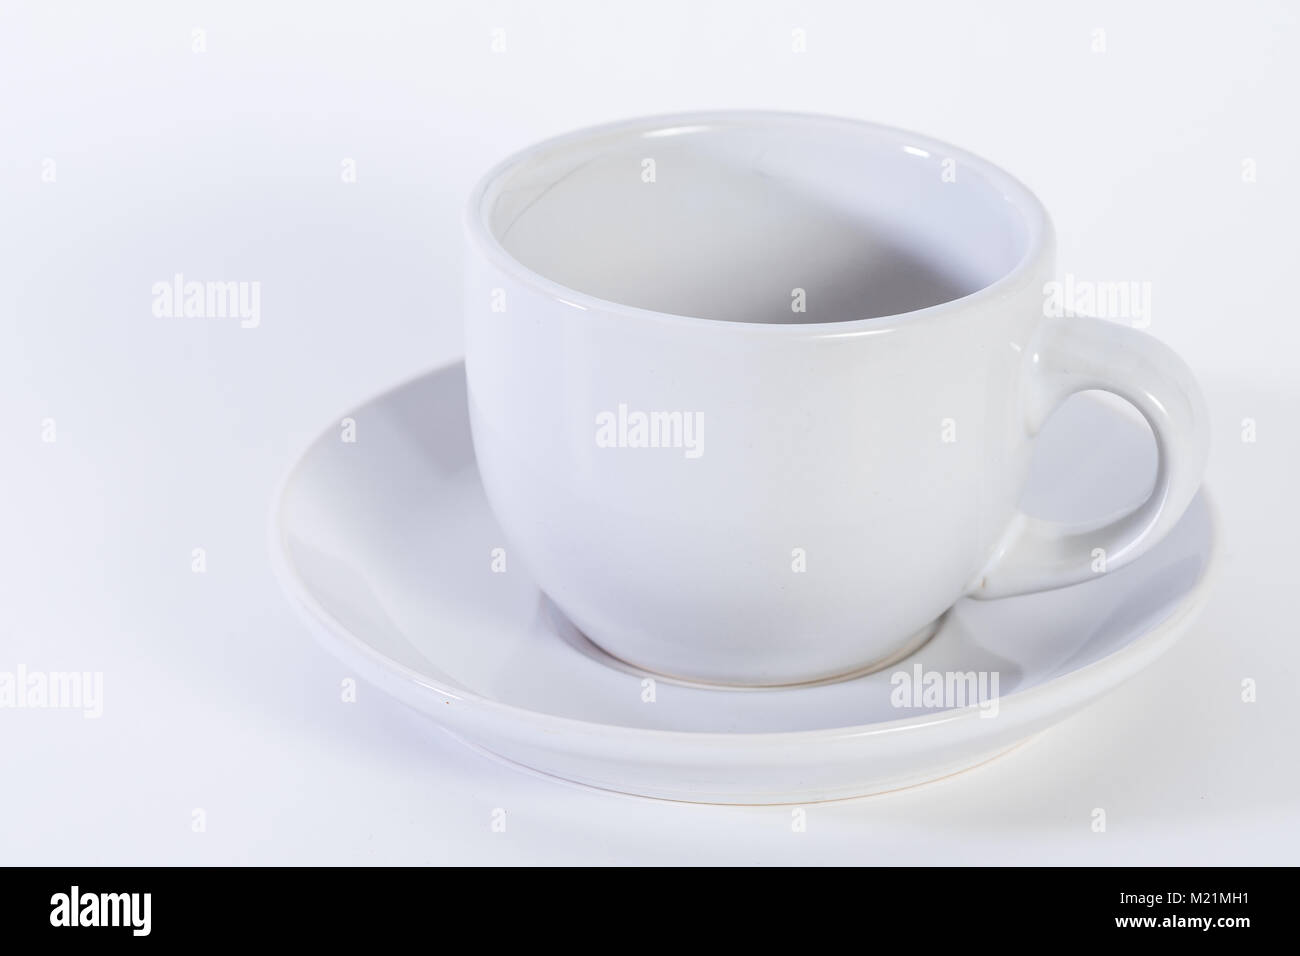 Coffee beans in a coffee or espresso cup, plain white background Stock Photo